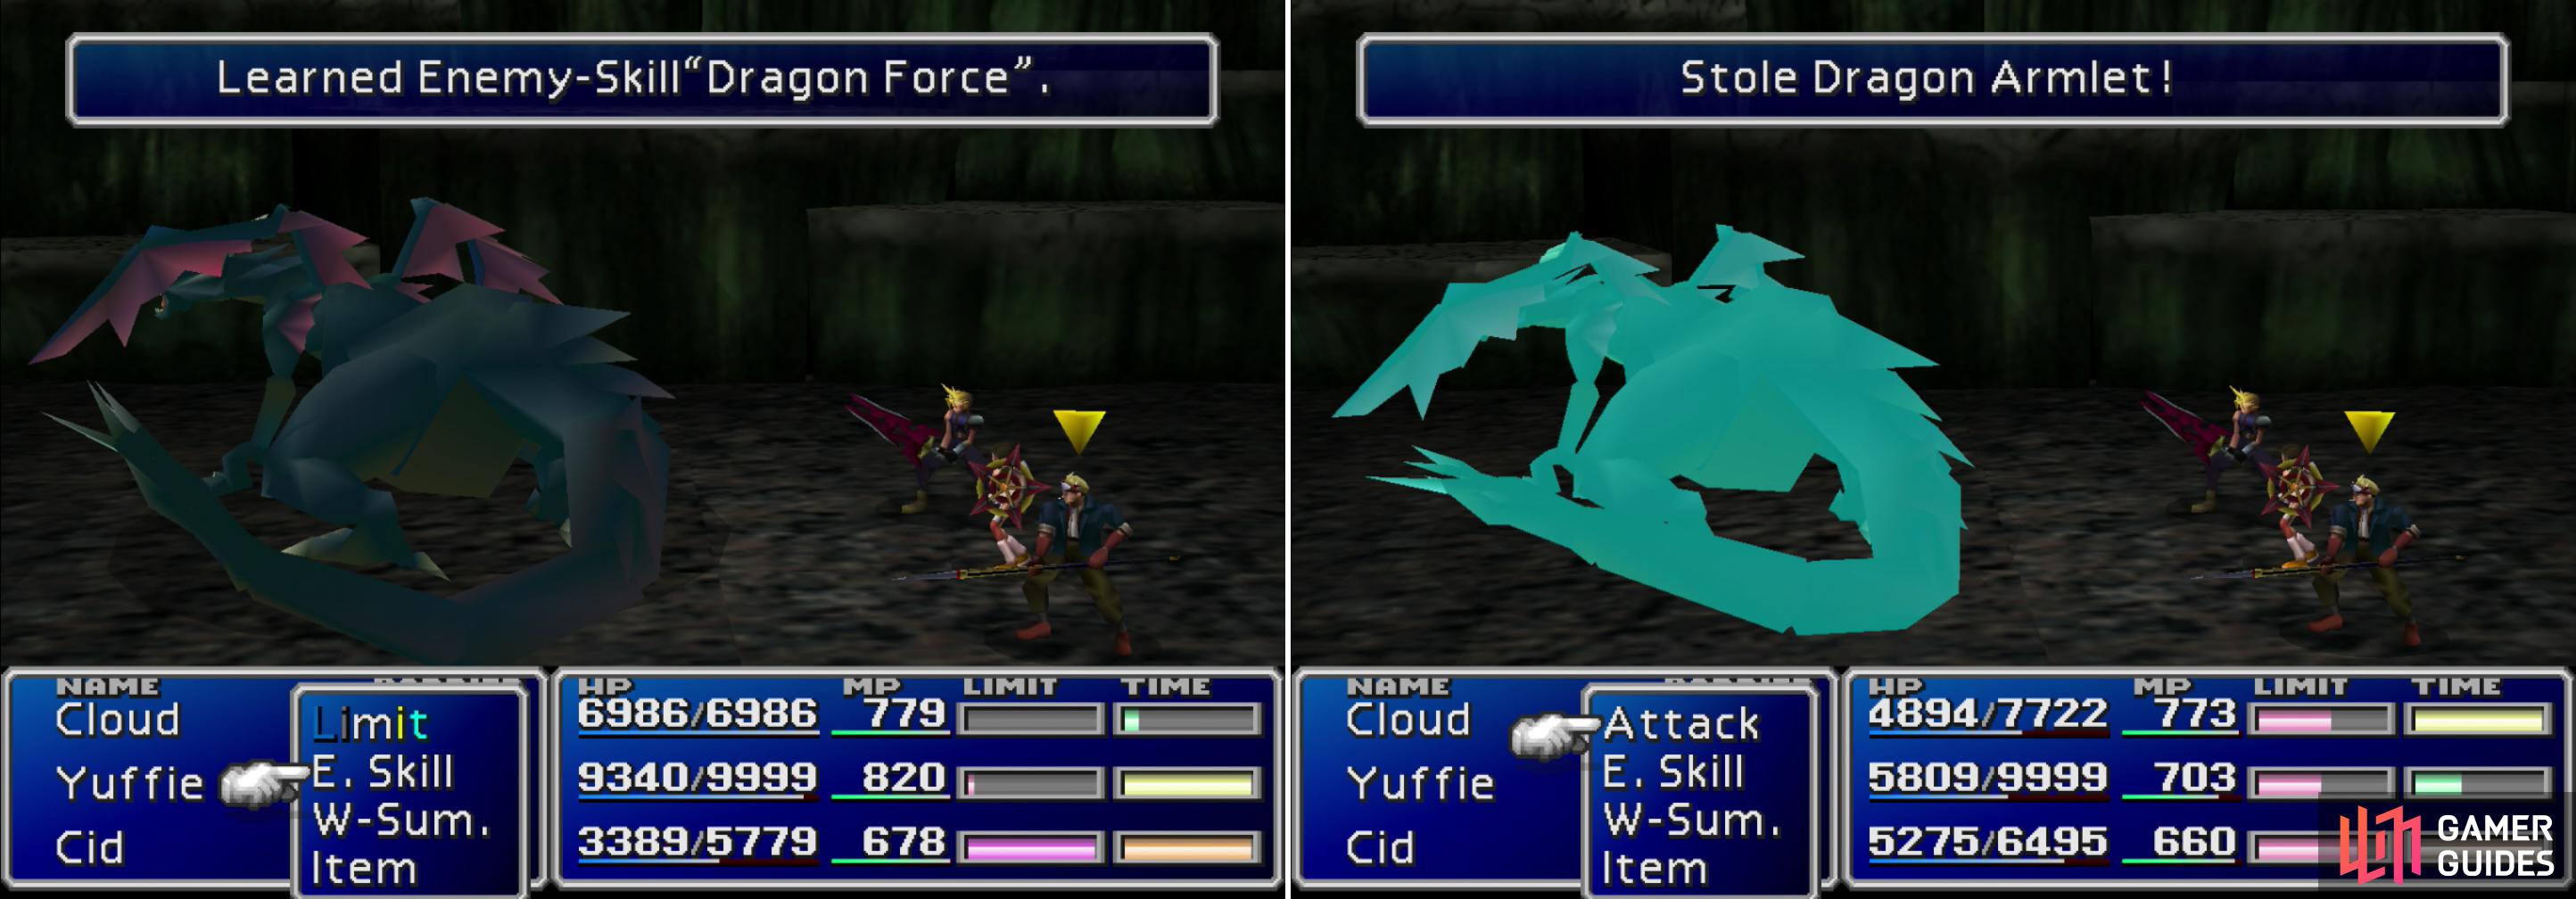 You can learn the "Dragon Force" and "Laser" Enemy Skills from Dark Dragons (left), you can also steal Dragon Armlets from them (right).